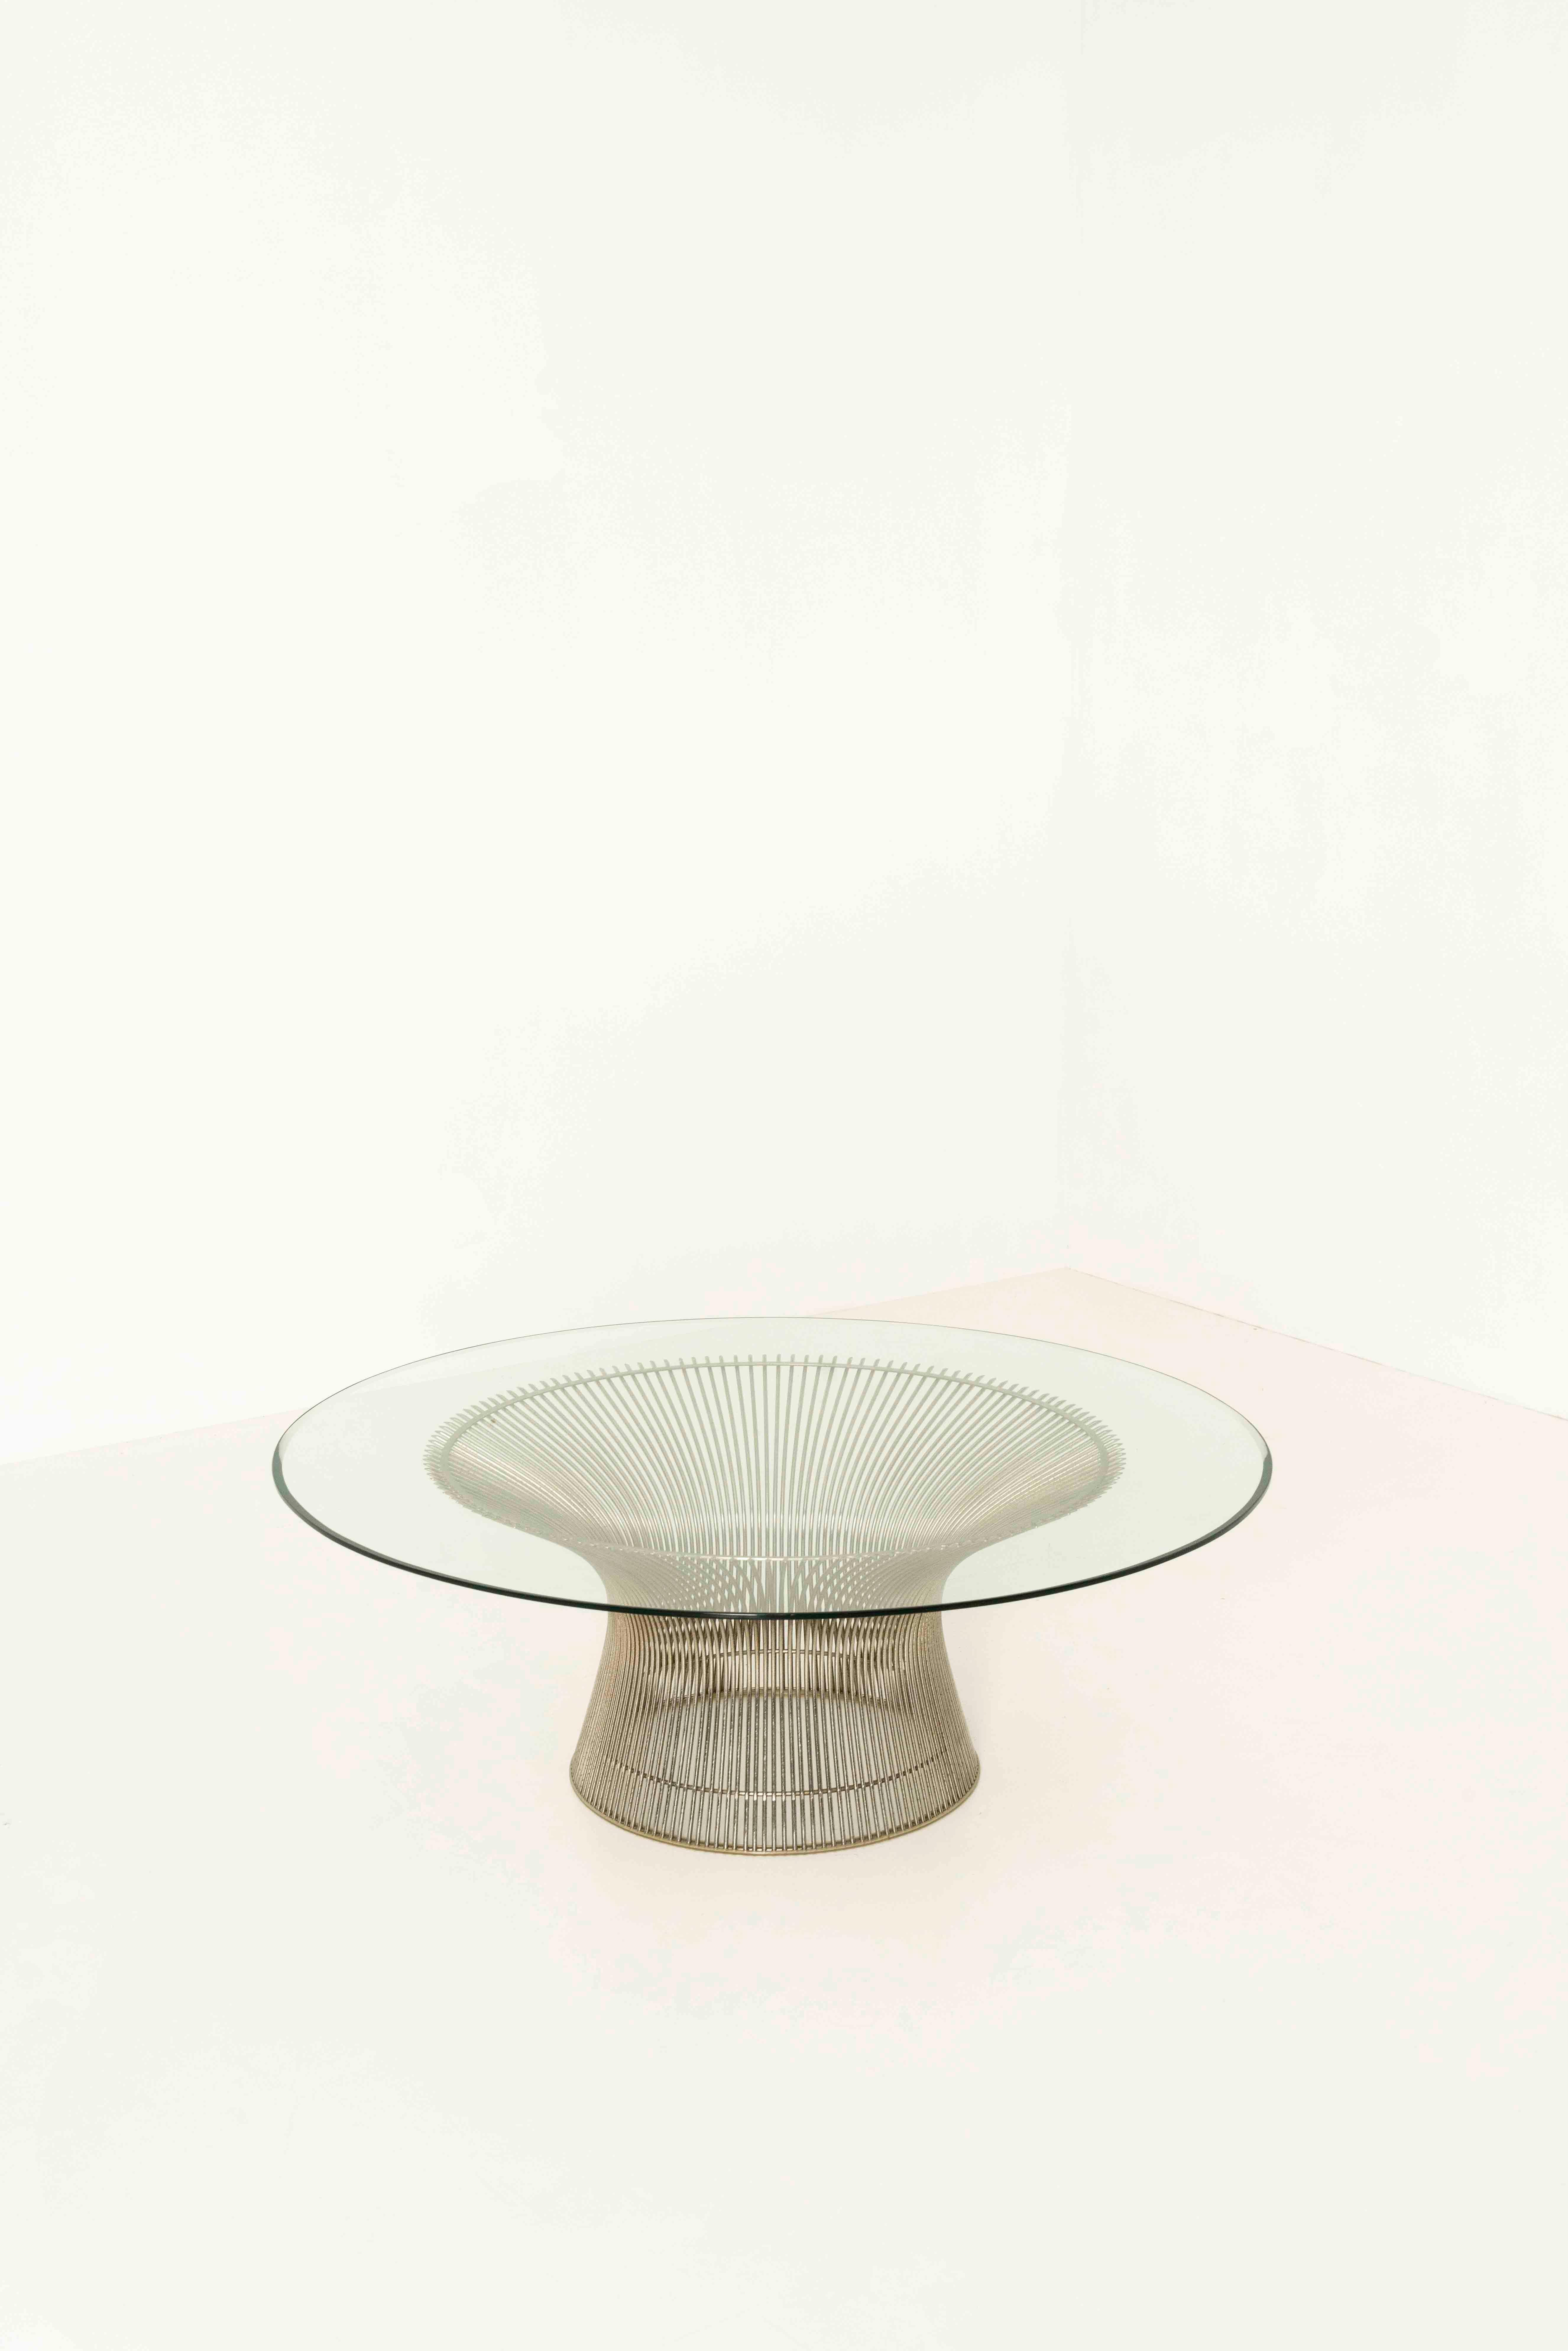 Warren Platner Coffee Table for Knoll with Glass and Nickel, USA 1970s 4